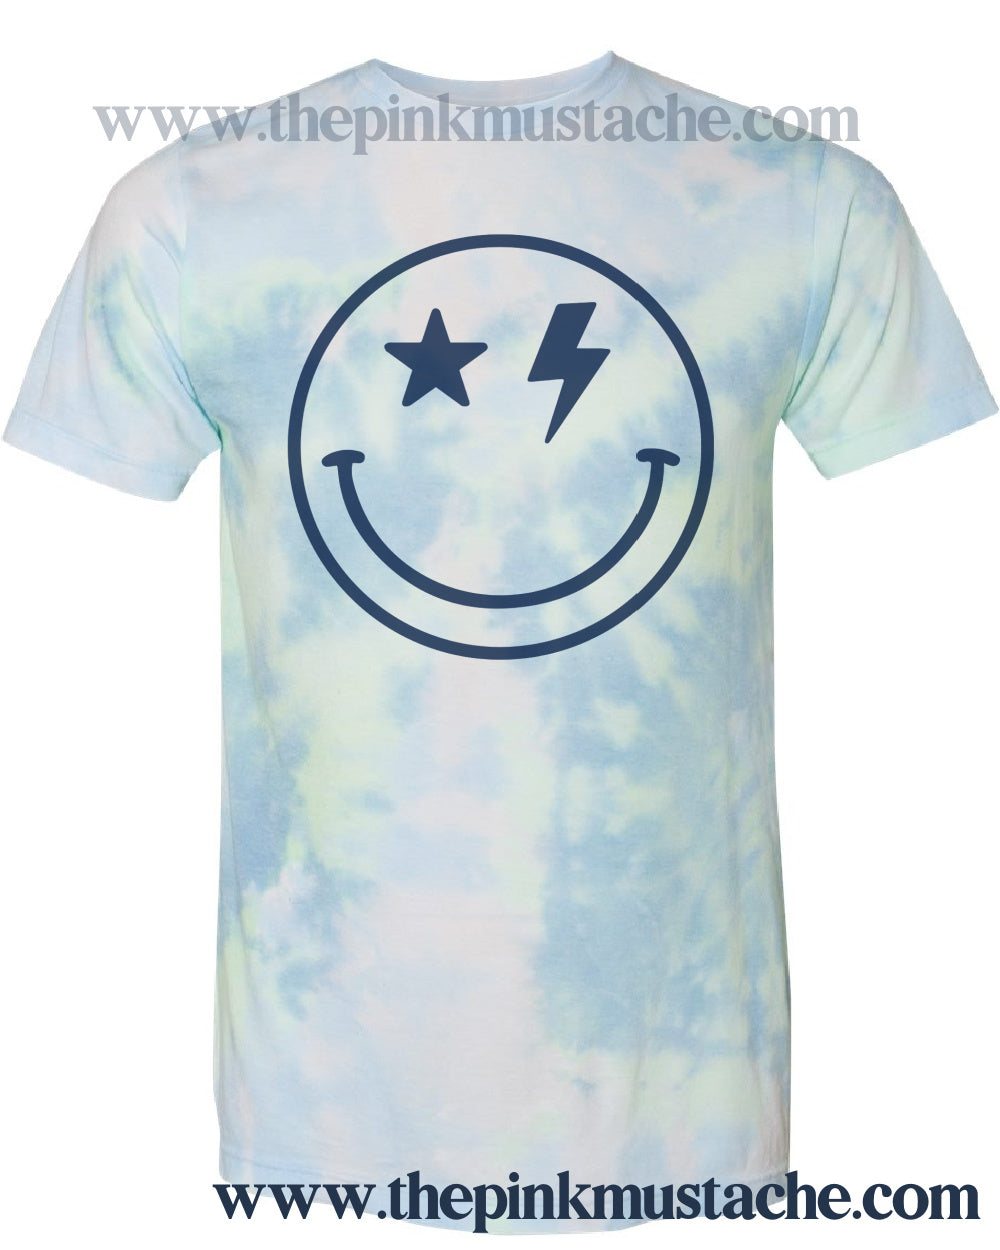 Happy Smiley Face Rocker Dream Tie Dyed Softstyle Tee/ Super Cute Dyed Rocker Tees - Unisex Sized/ Vintage Rock N Roll Styled Hippie Shirt